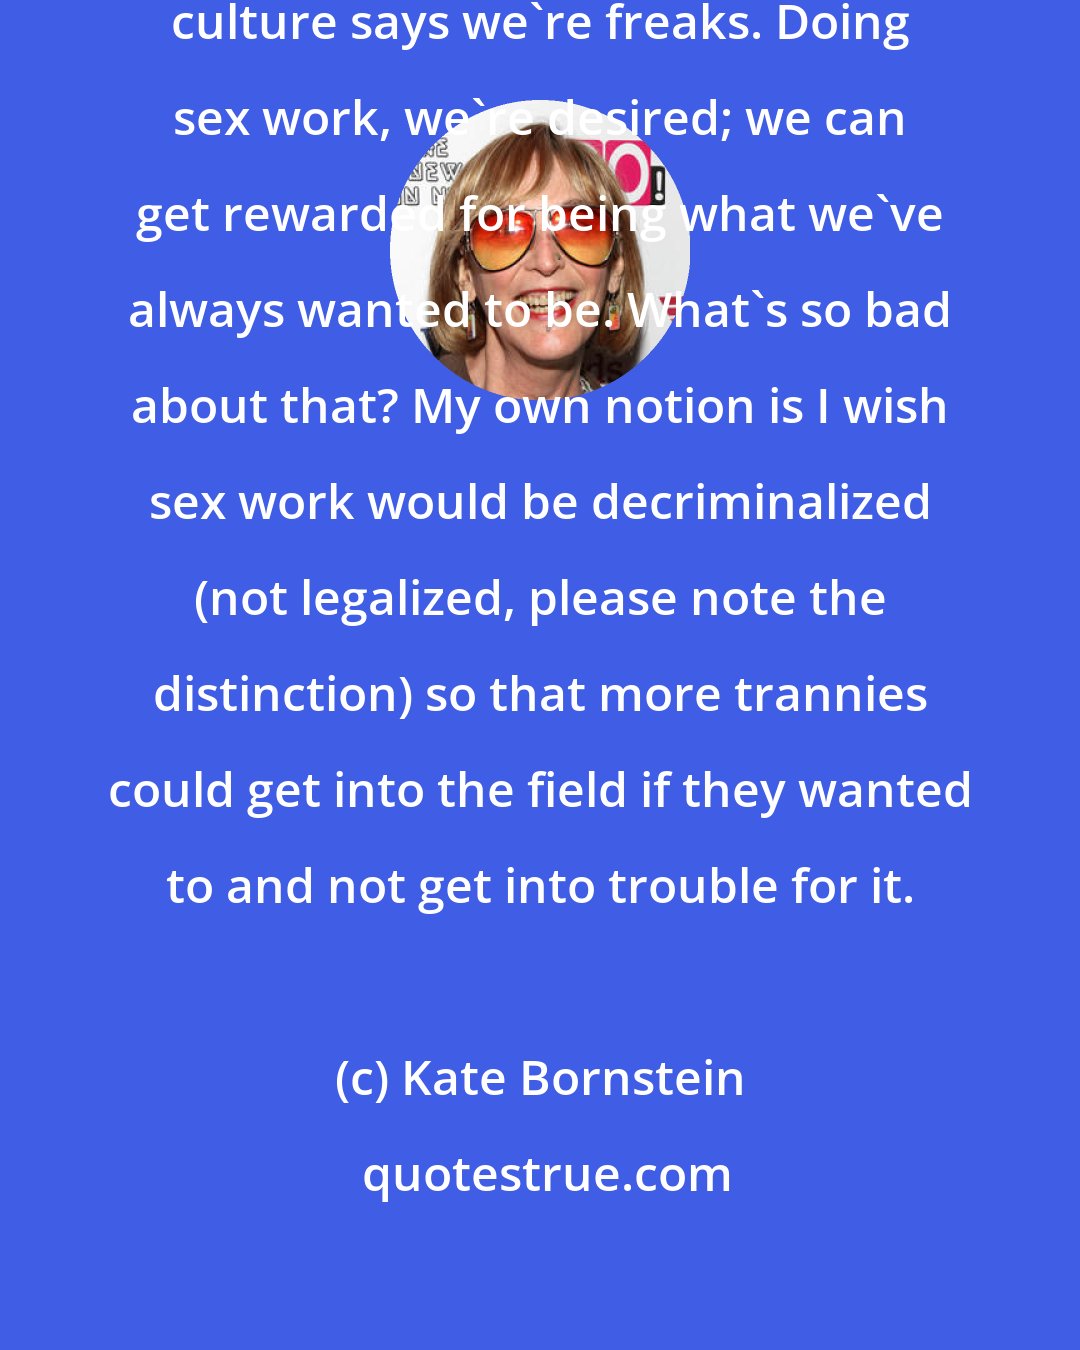 Kate Bornstein: Look, nearly everything in the culture says we're freaks. Doing sex work, we're desired; we can get rewarded for being what we've always wanted to be. What's so bad about that? My own notion is I wish sex work would be decriminalized (not legalized, please note the distinction) so that more trannies could get into the field if they wanted to and not get into trouble for it.